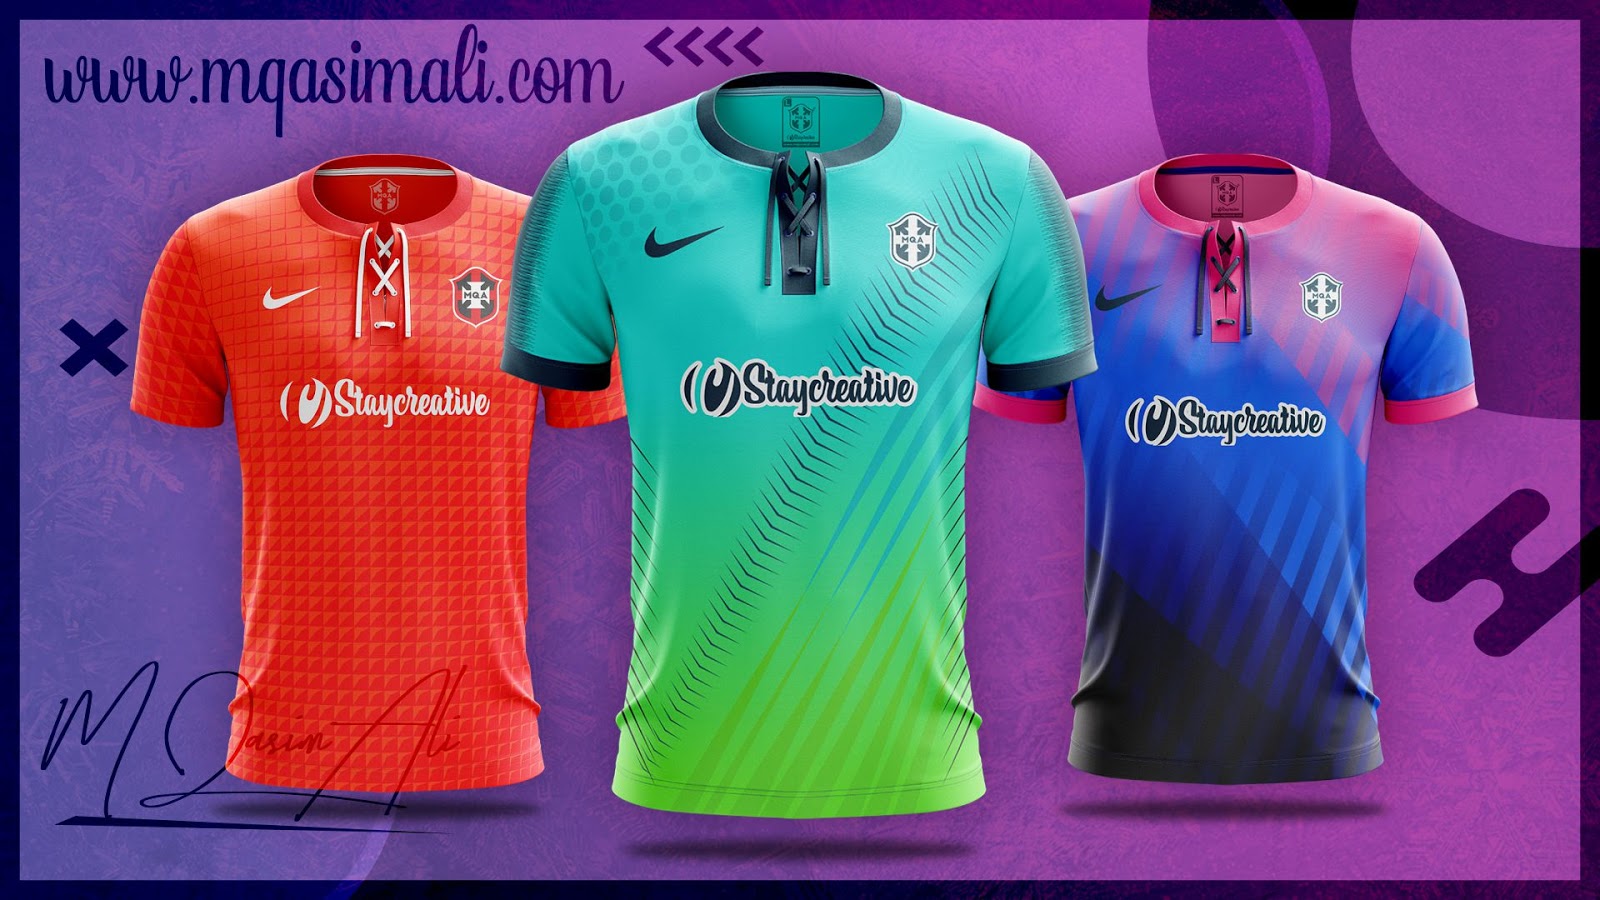 Download Sports Templates for Photoshop_ Create Cool Football/Soccer Jersey Inside of Photoshop by M ...